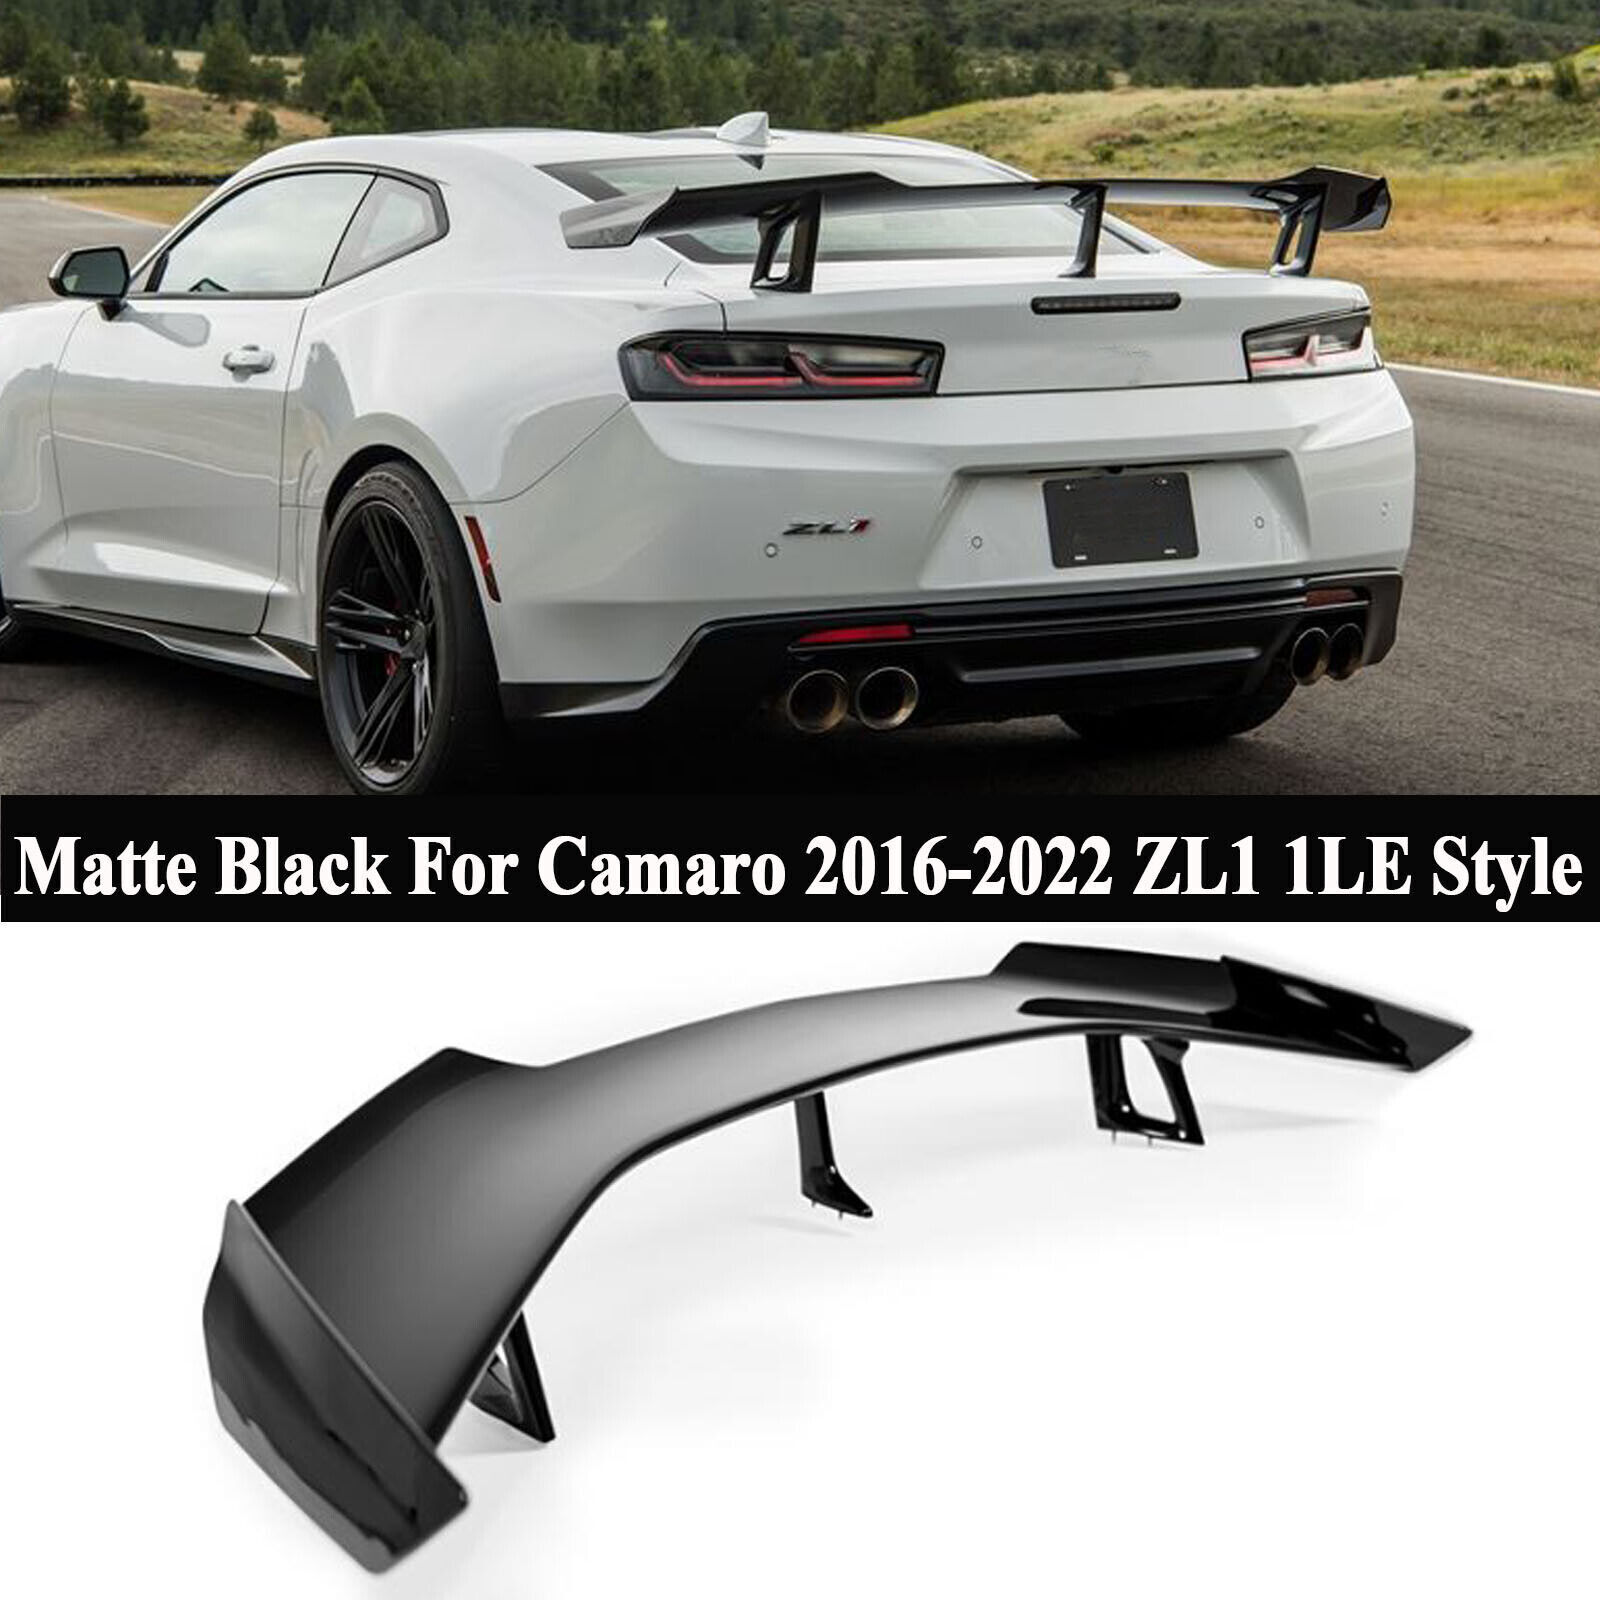 Matte Black Spoiler Wing Fits For Chevy Camaro ZL1 1LE Style LT RS SS 2016-2022